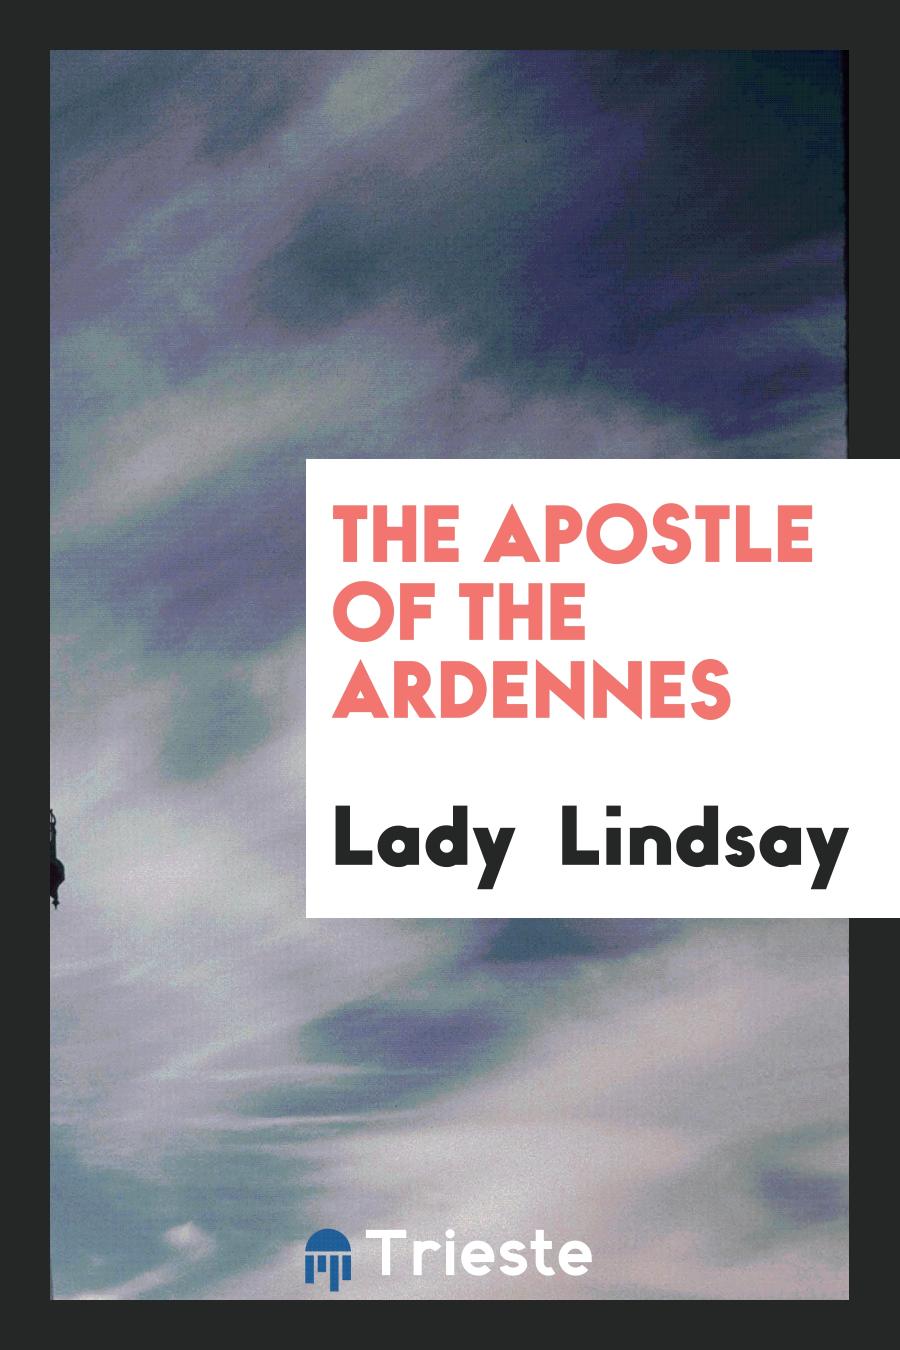 The Apostle of the Ardennes